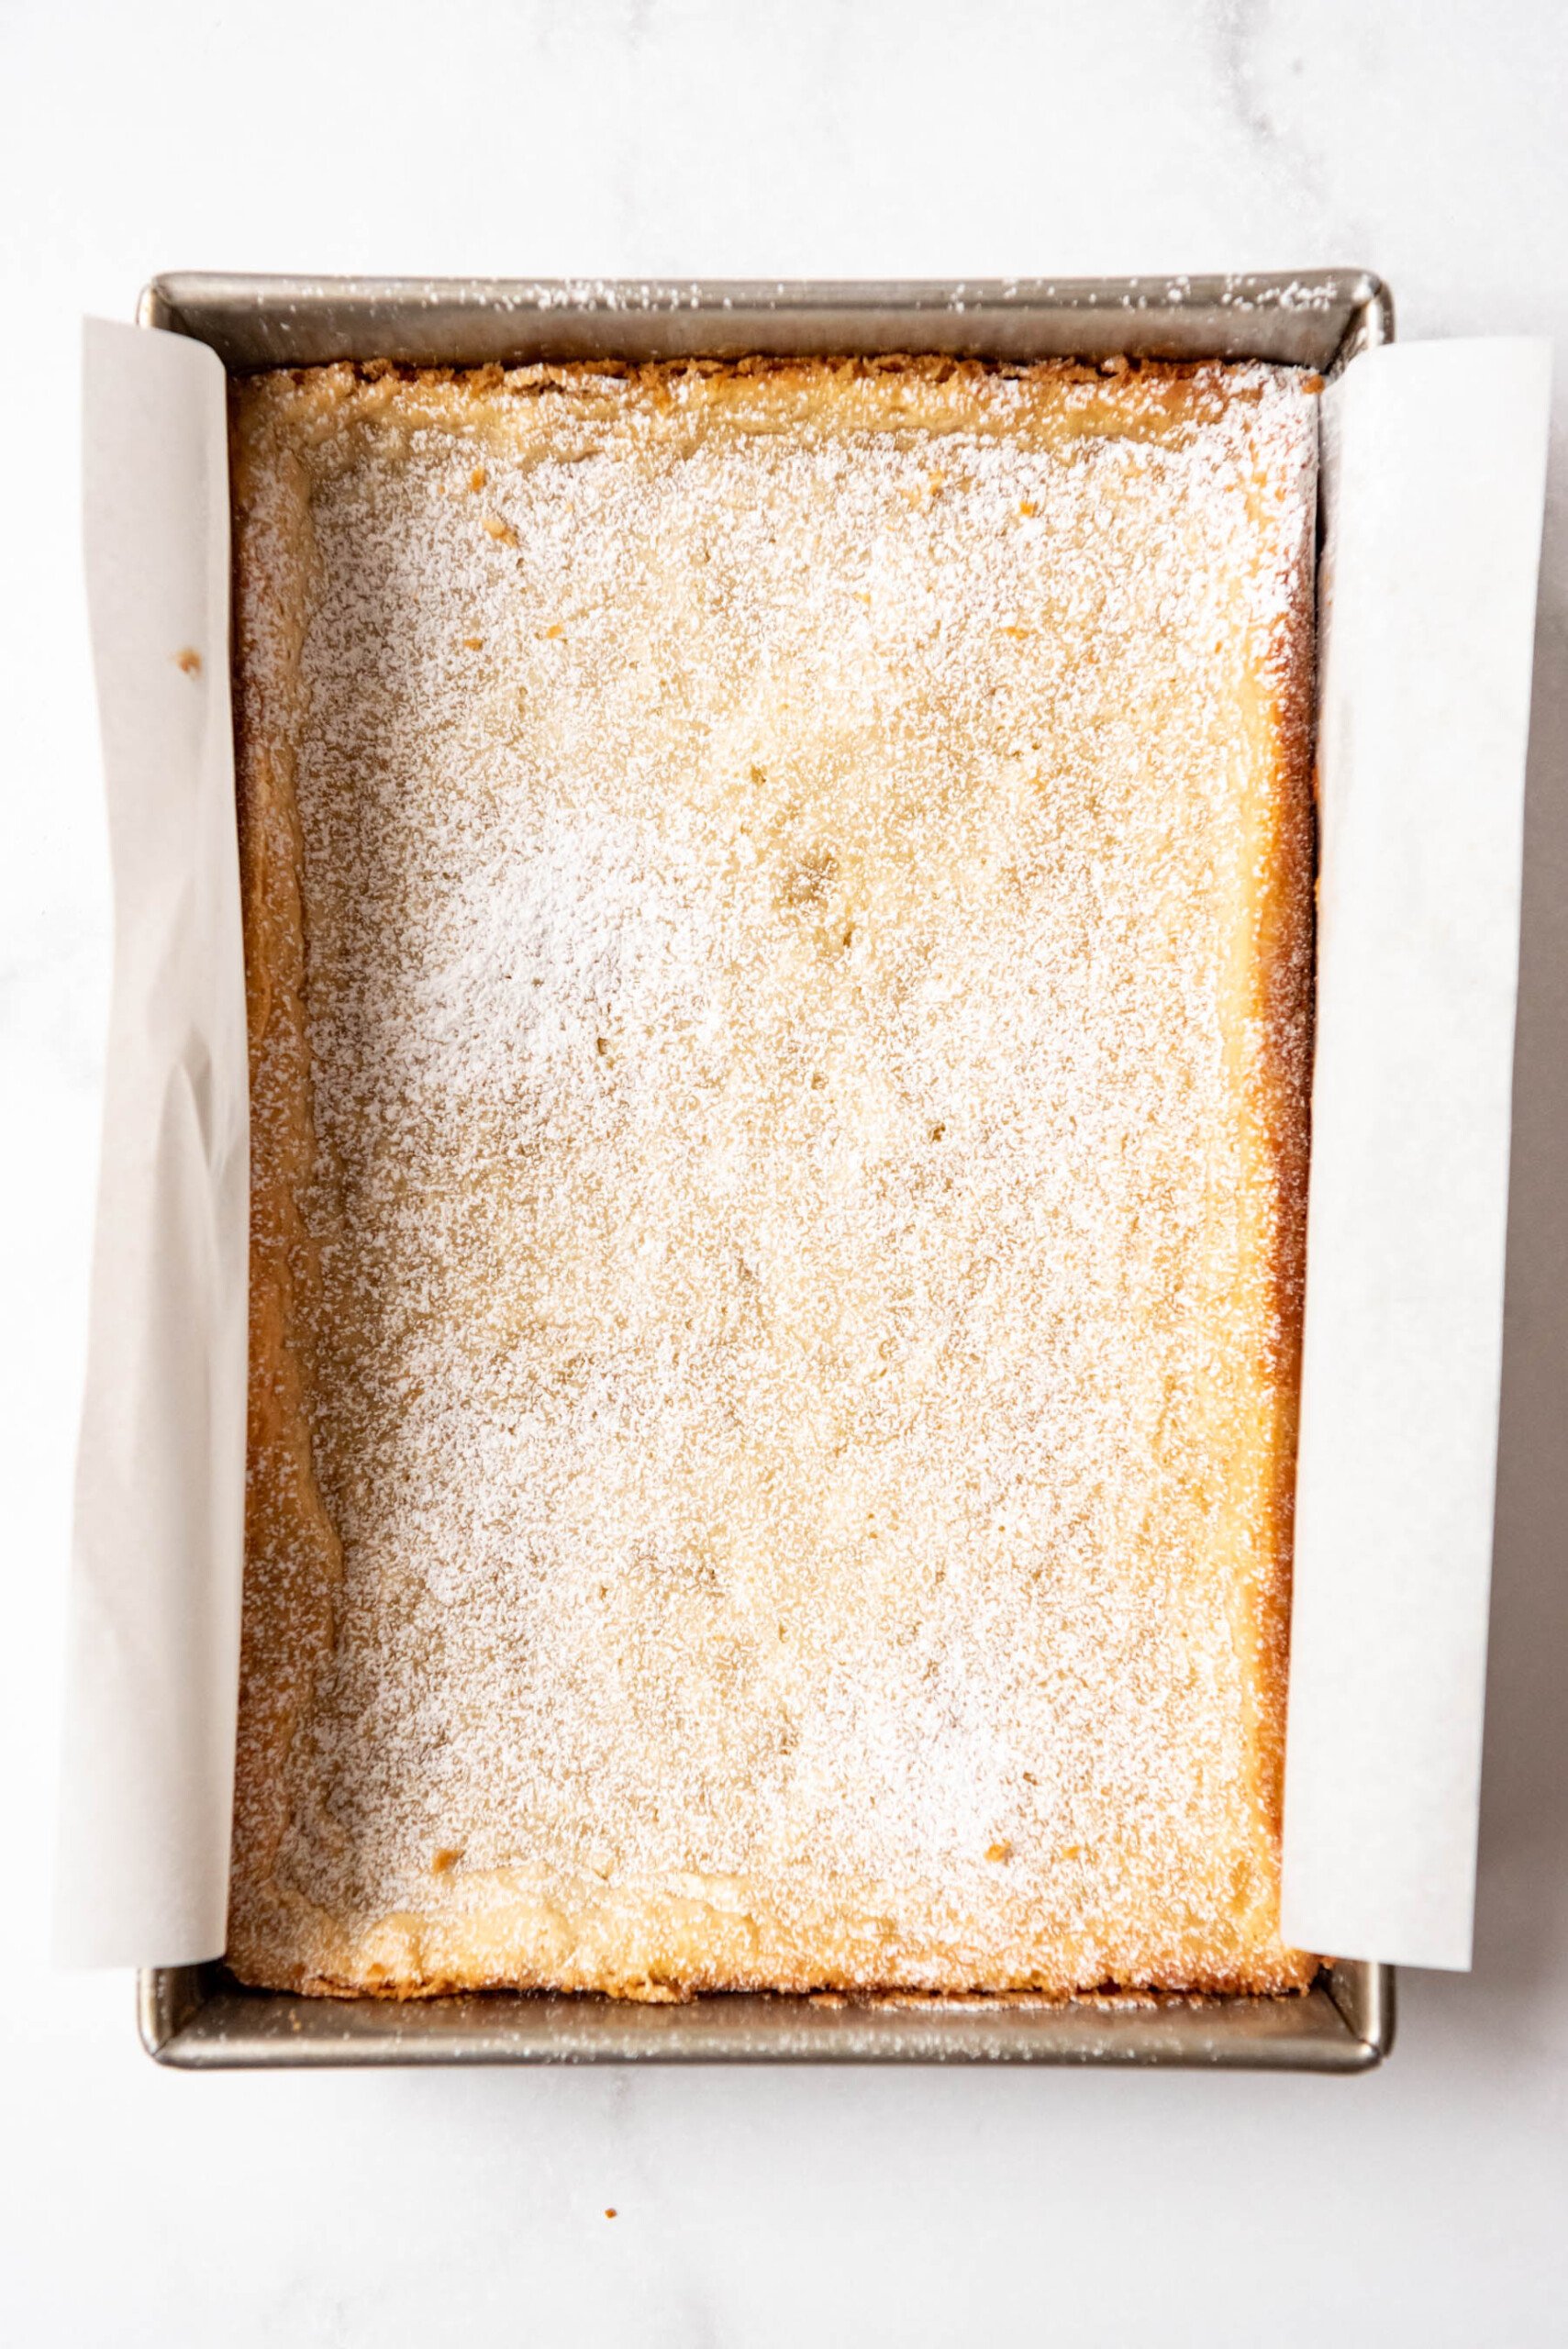 Top view of freshly baked gooey butter cake dusted with powdered sugar.